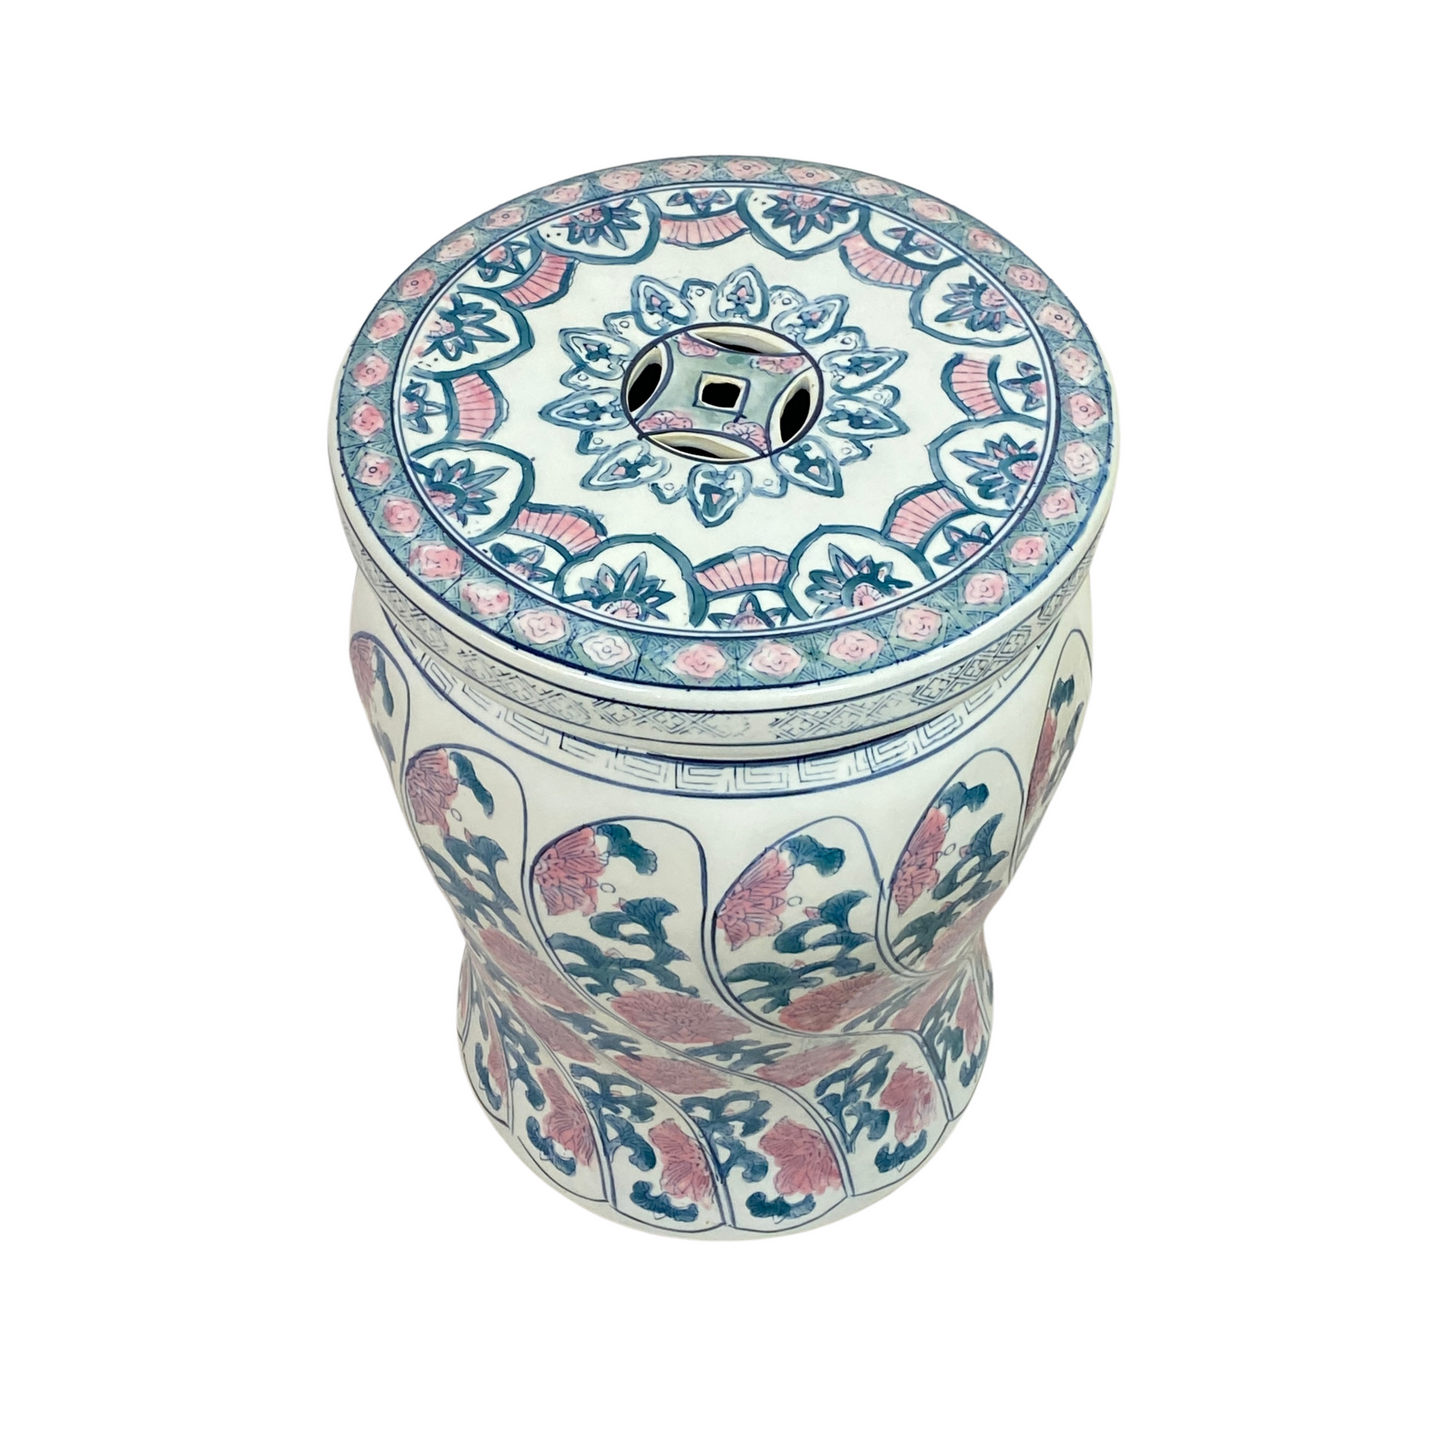 Vintage Chinese Porcelain Hand Painted Garden Stool